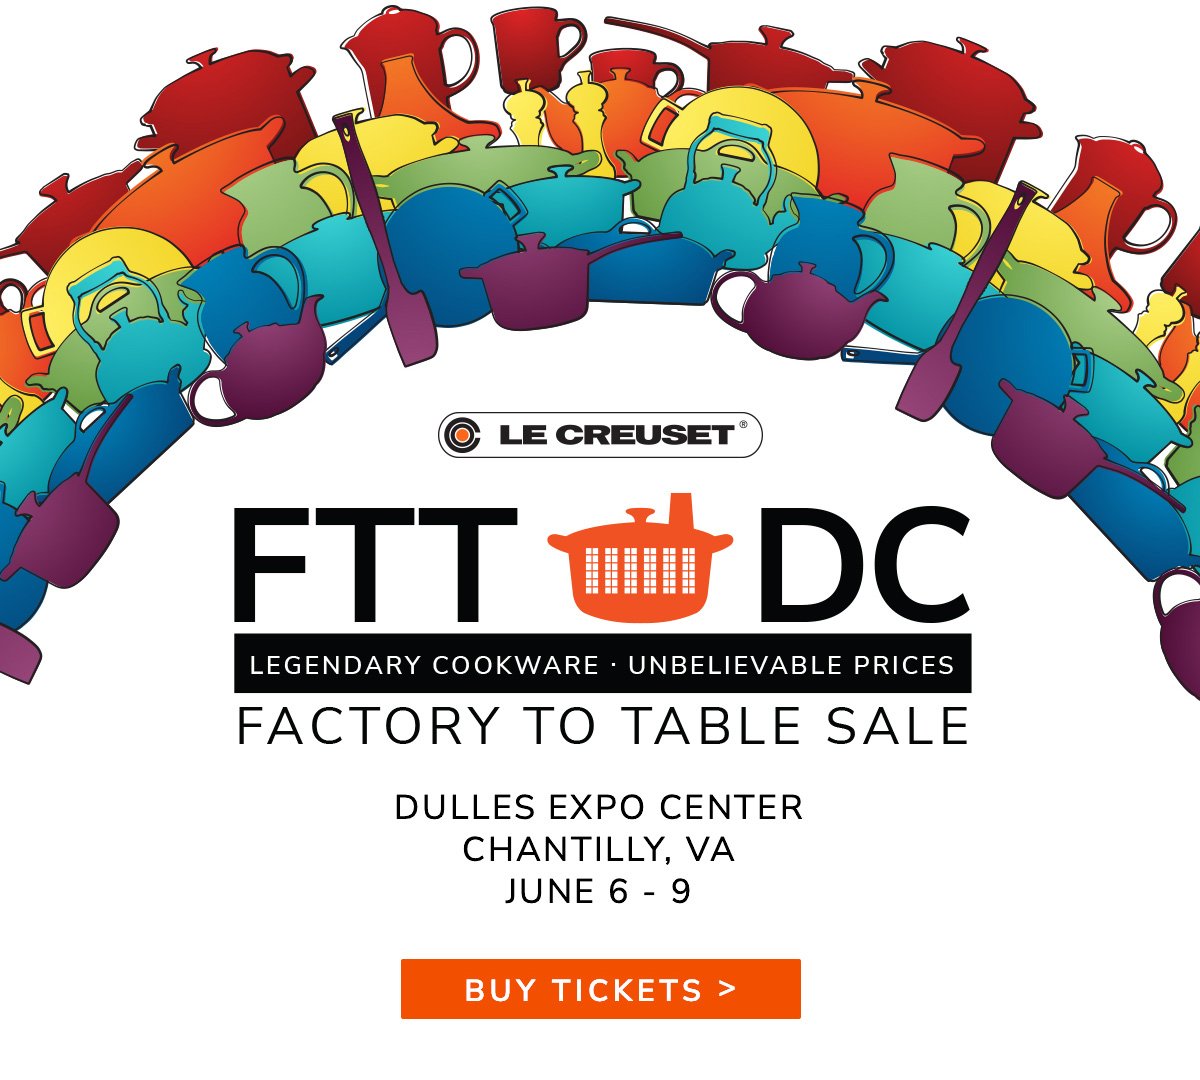 Factory to Table Sale - DULLES EXPO CENTER - CHANTILLY, VA - JUNE 6 - 9 - BUY TICKETS